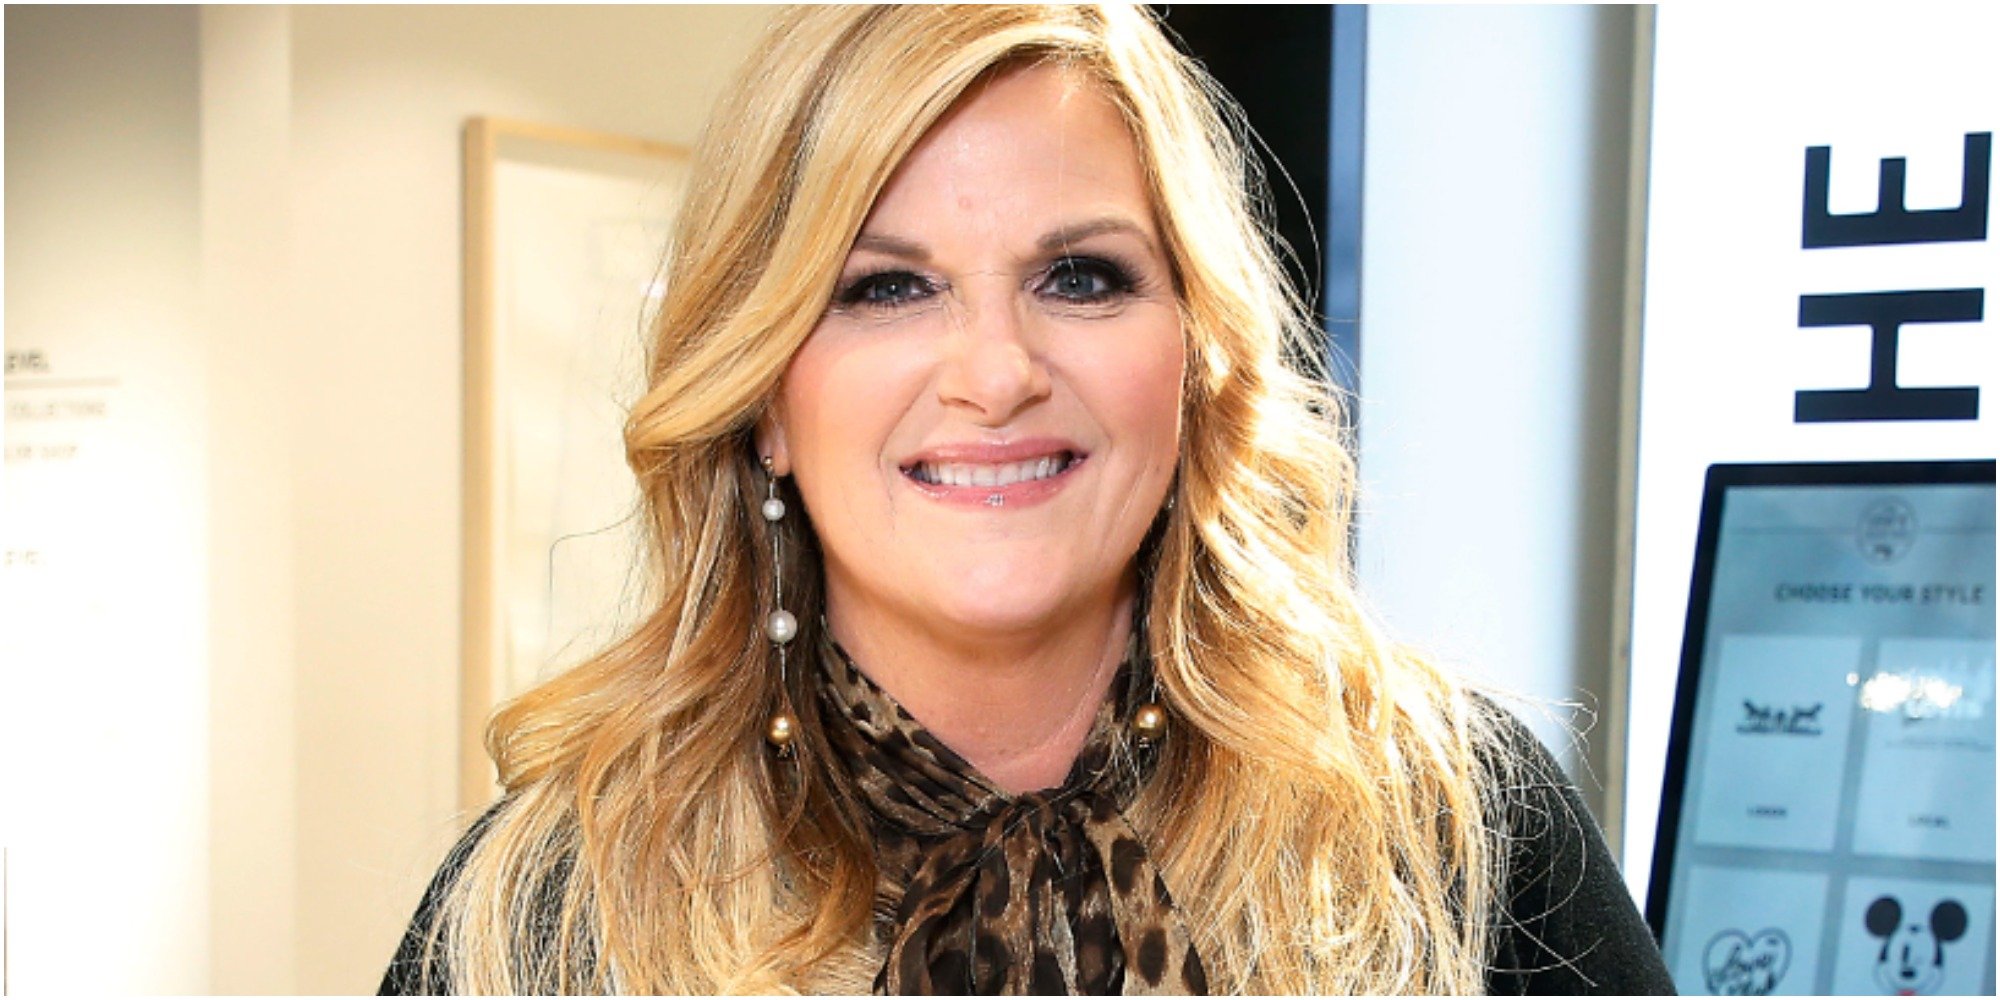 Trisha Yearwood visits "Extra" at The Levi's Store Times Square on February 14, 2019 in New York City.